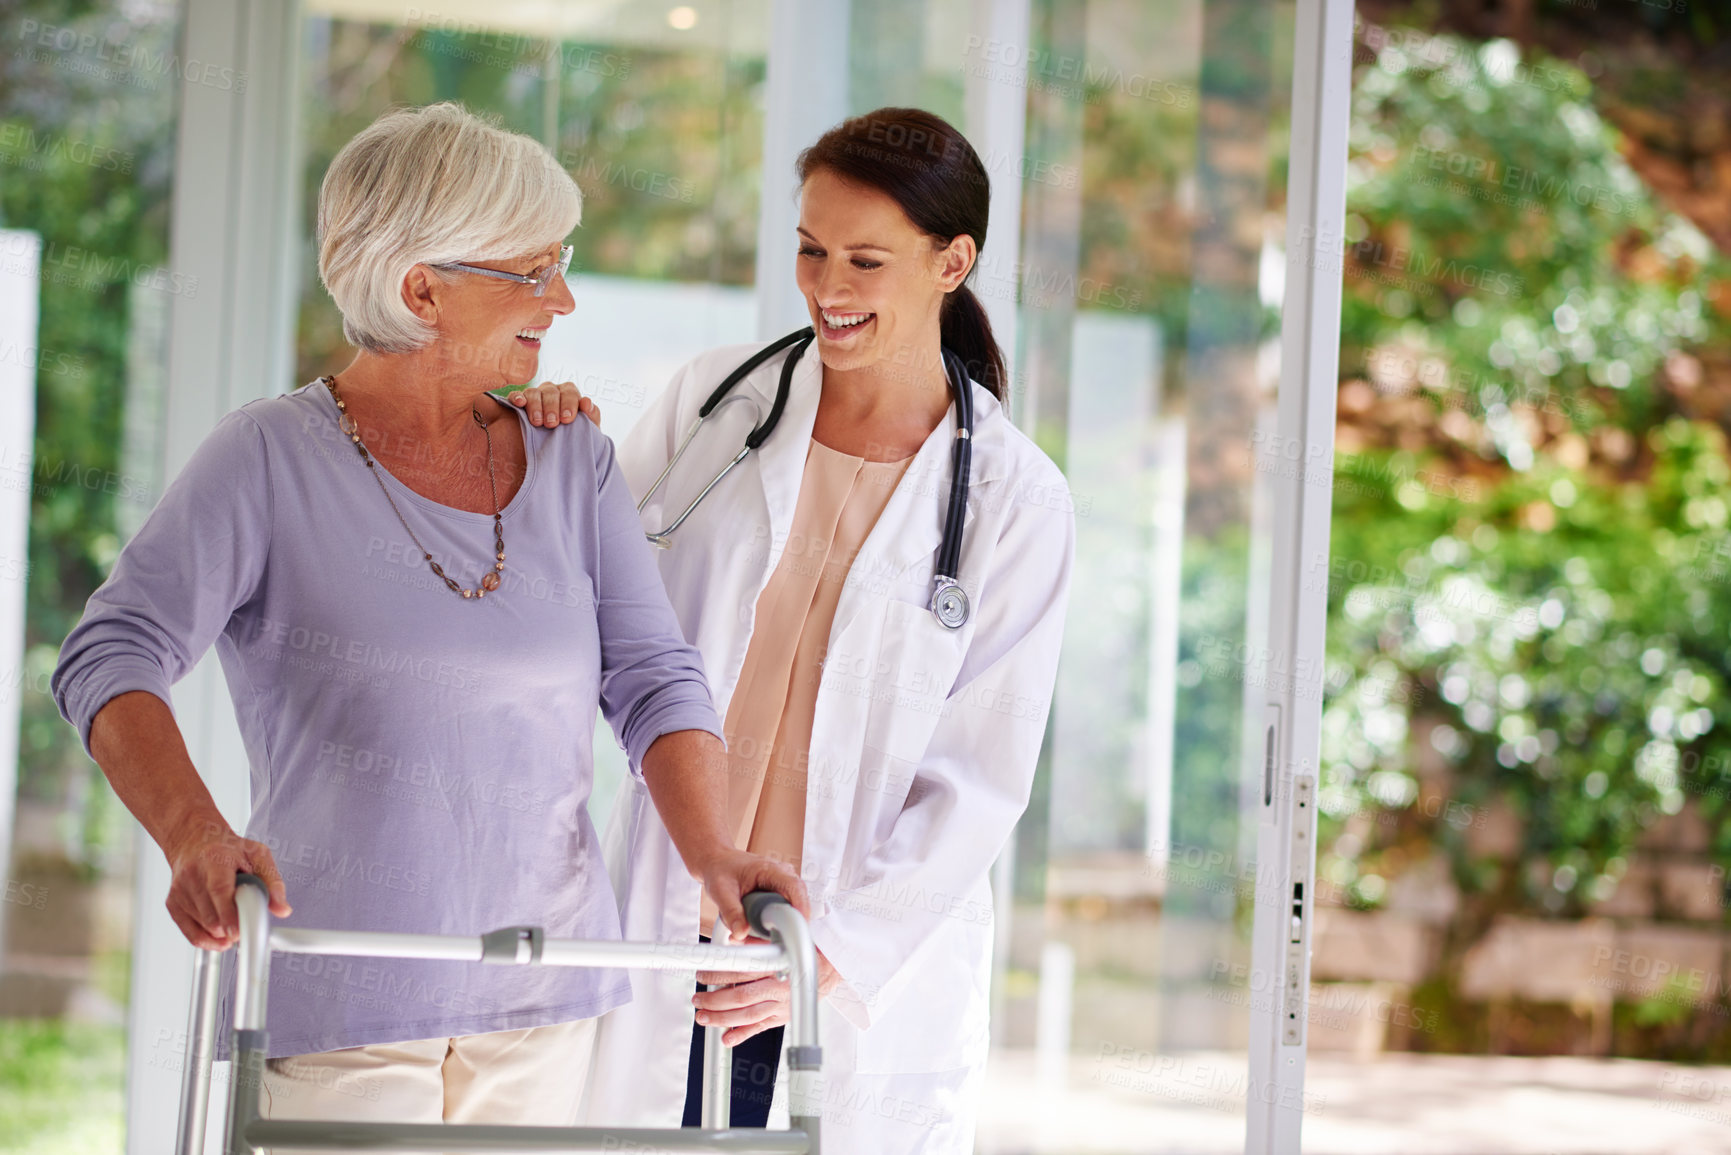 Buy stock photo Shot of a senior woman using an orthopedic walker, chatting happily with her doctor